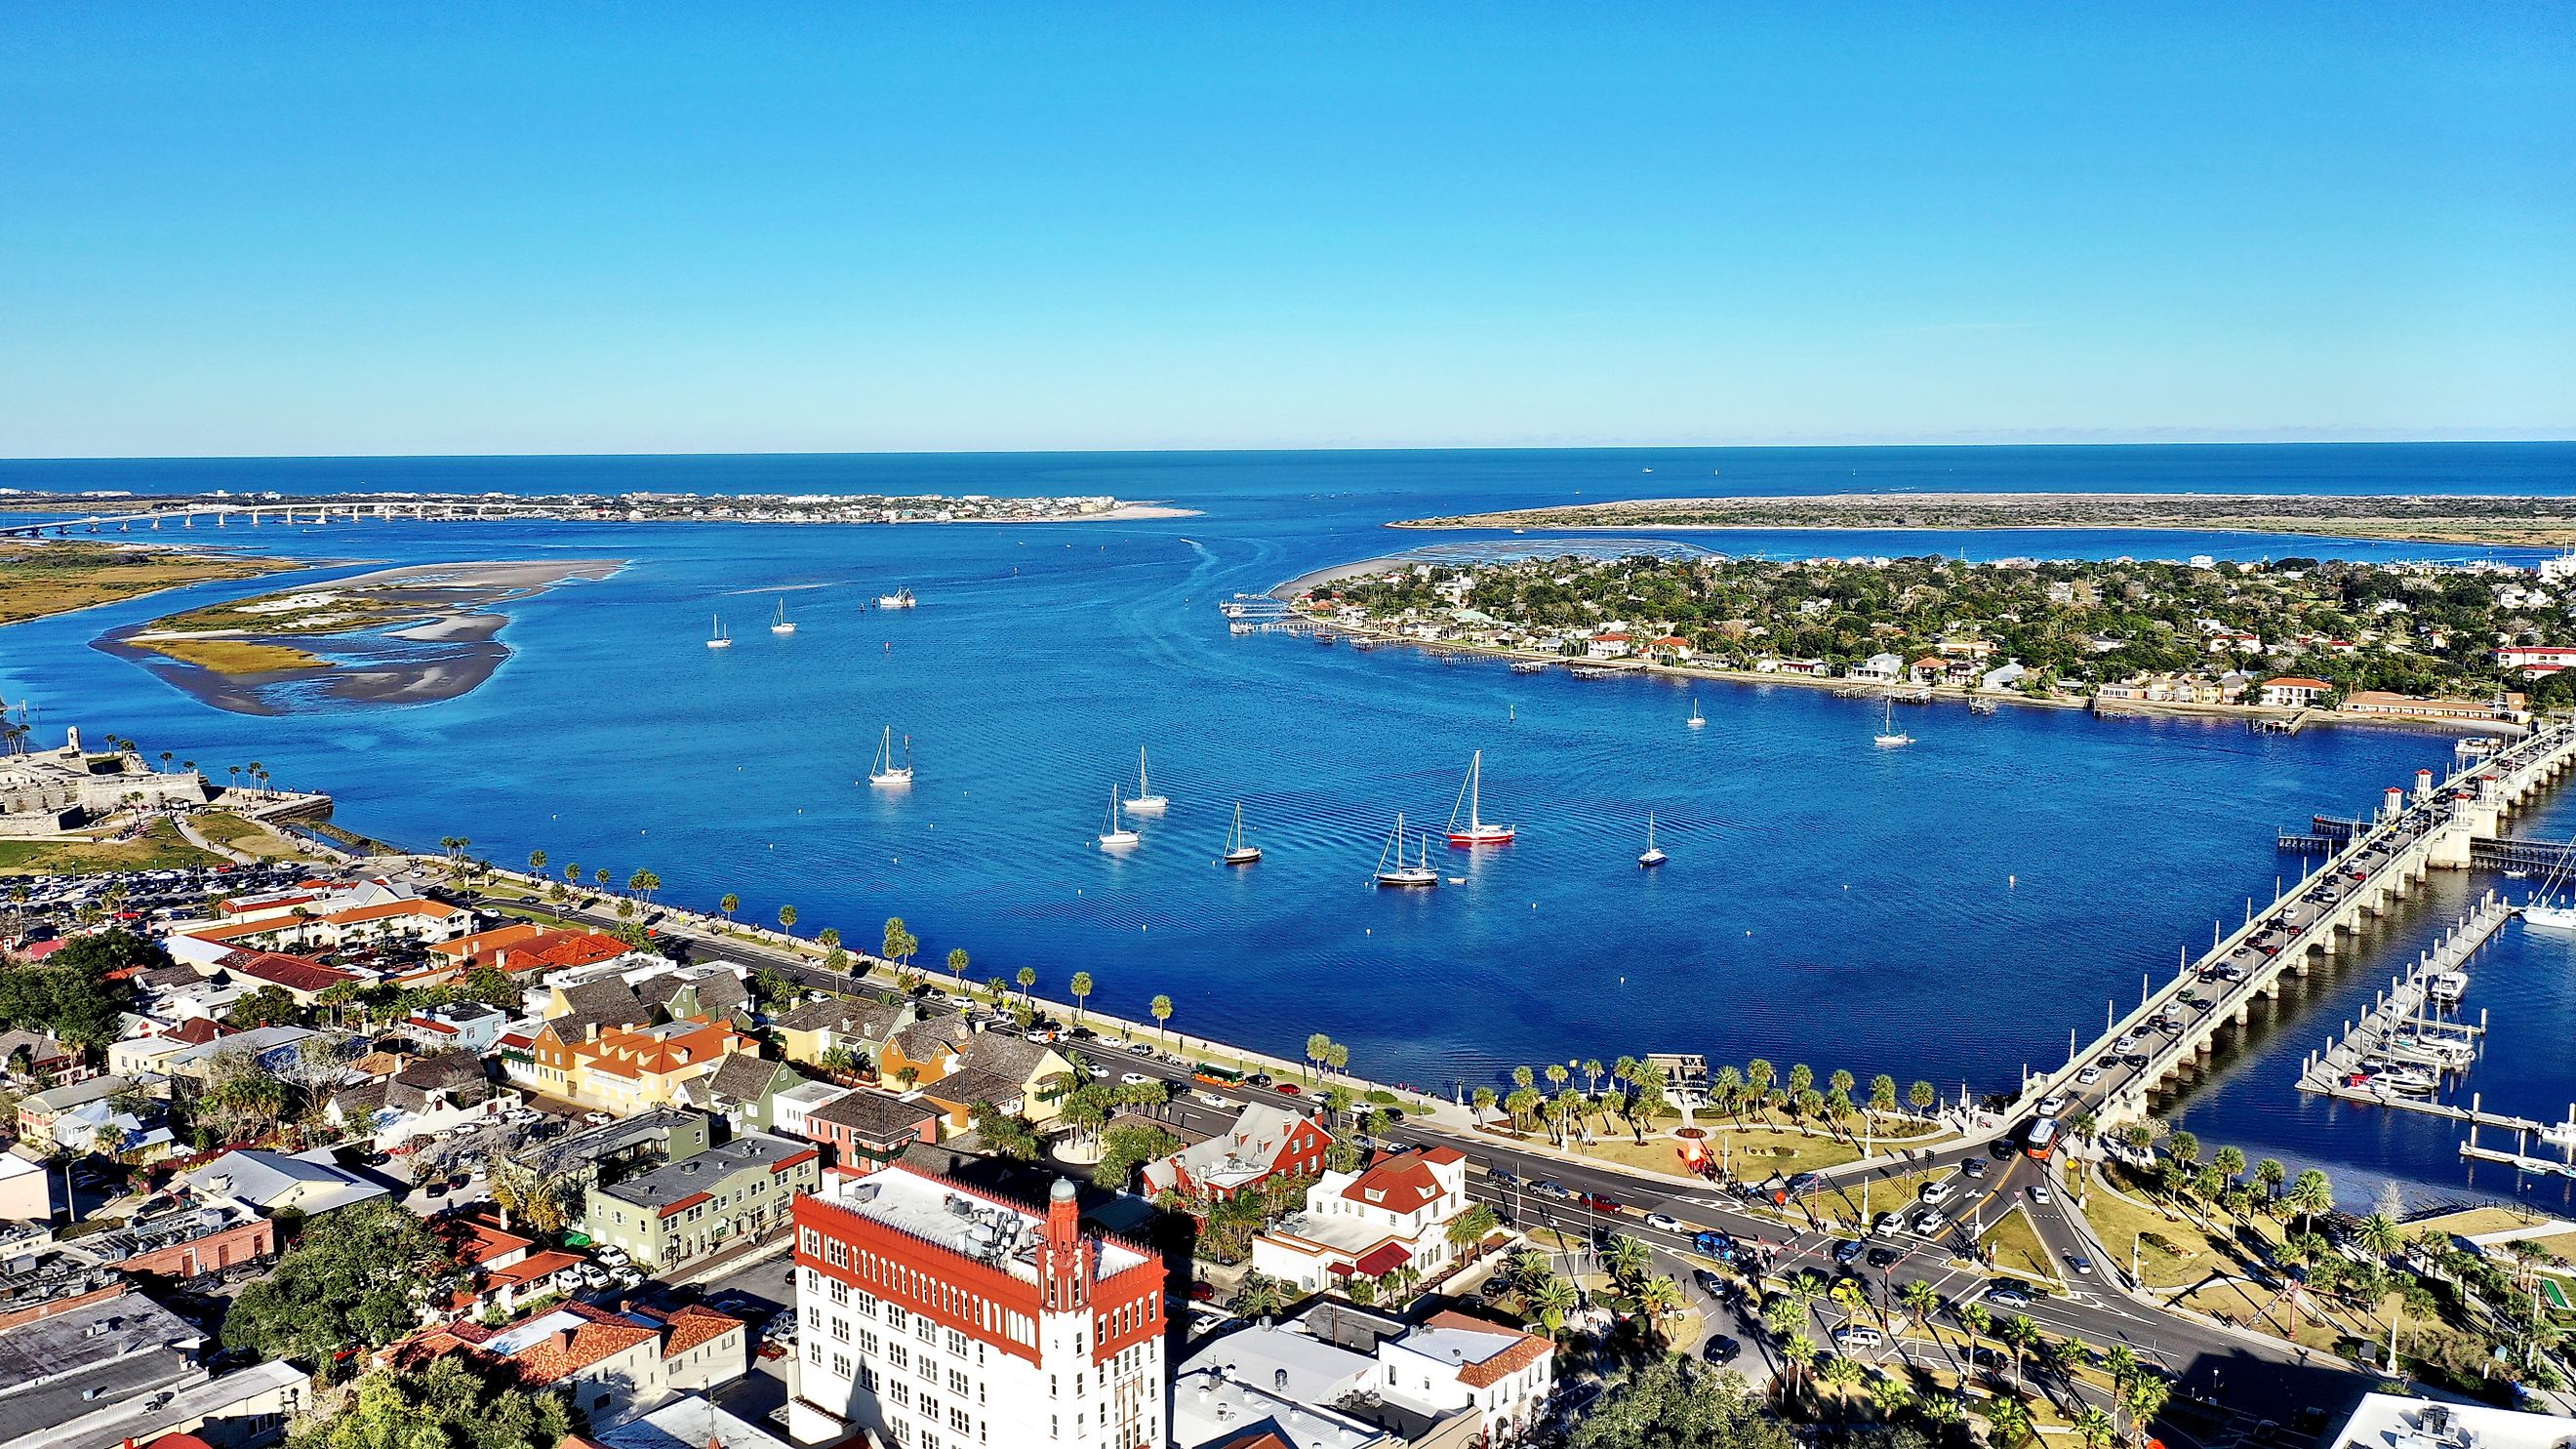 Airel view of St Augustine Florida